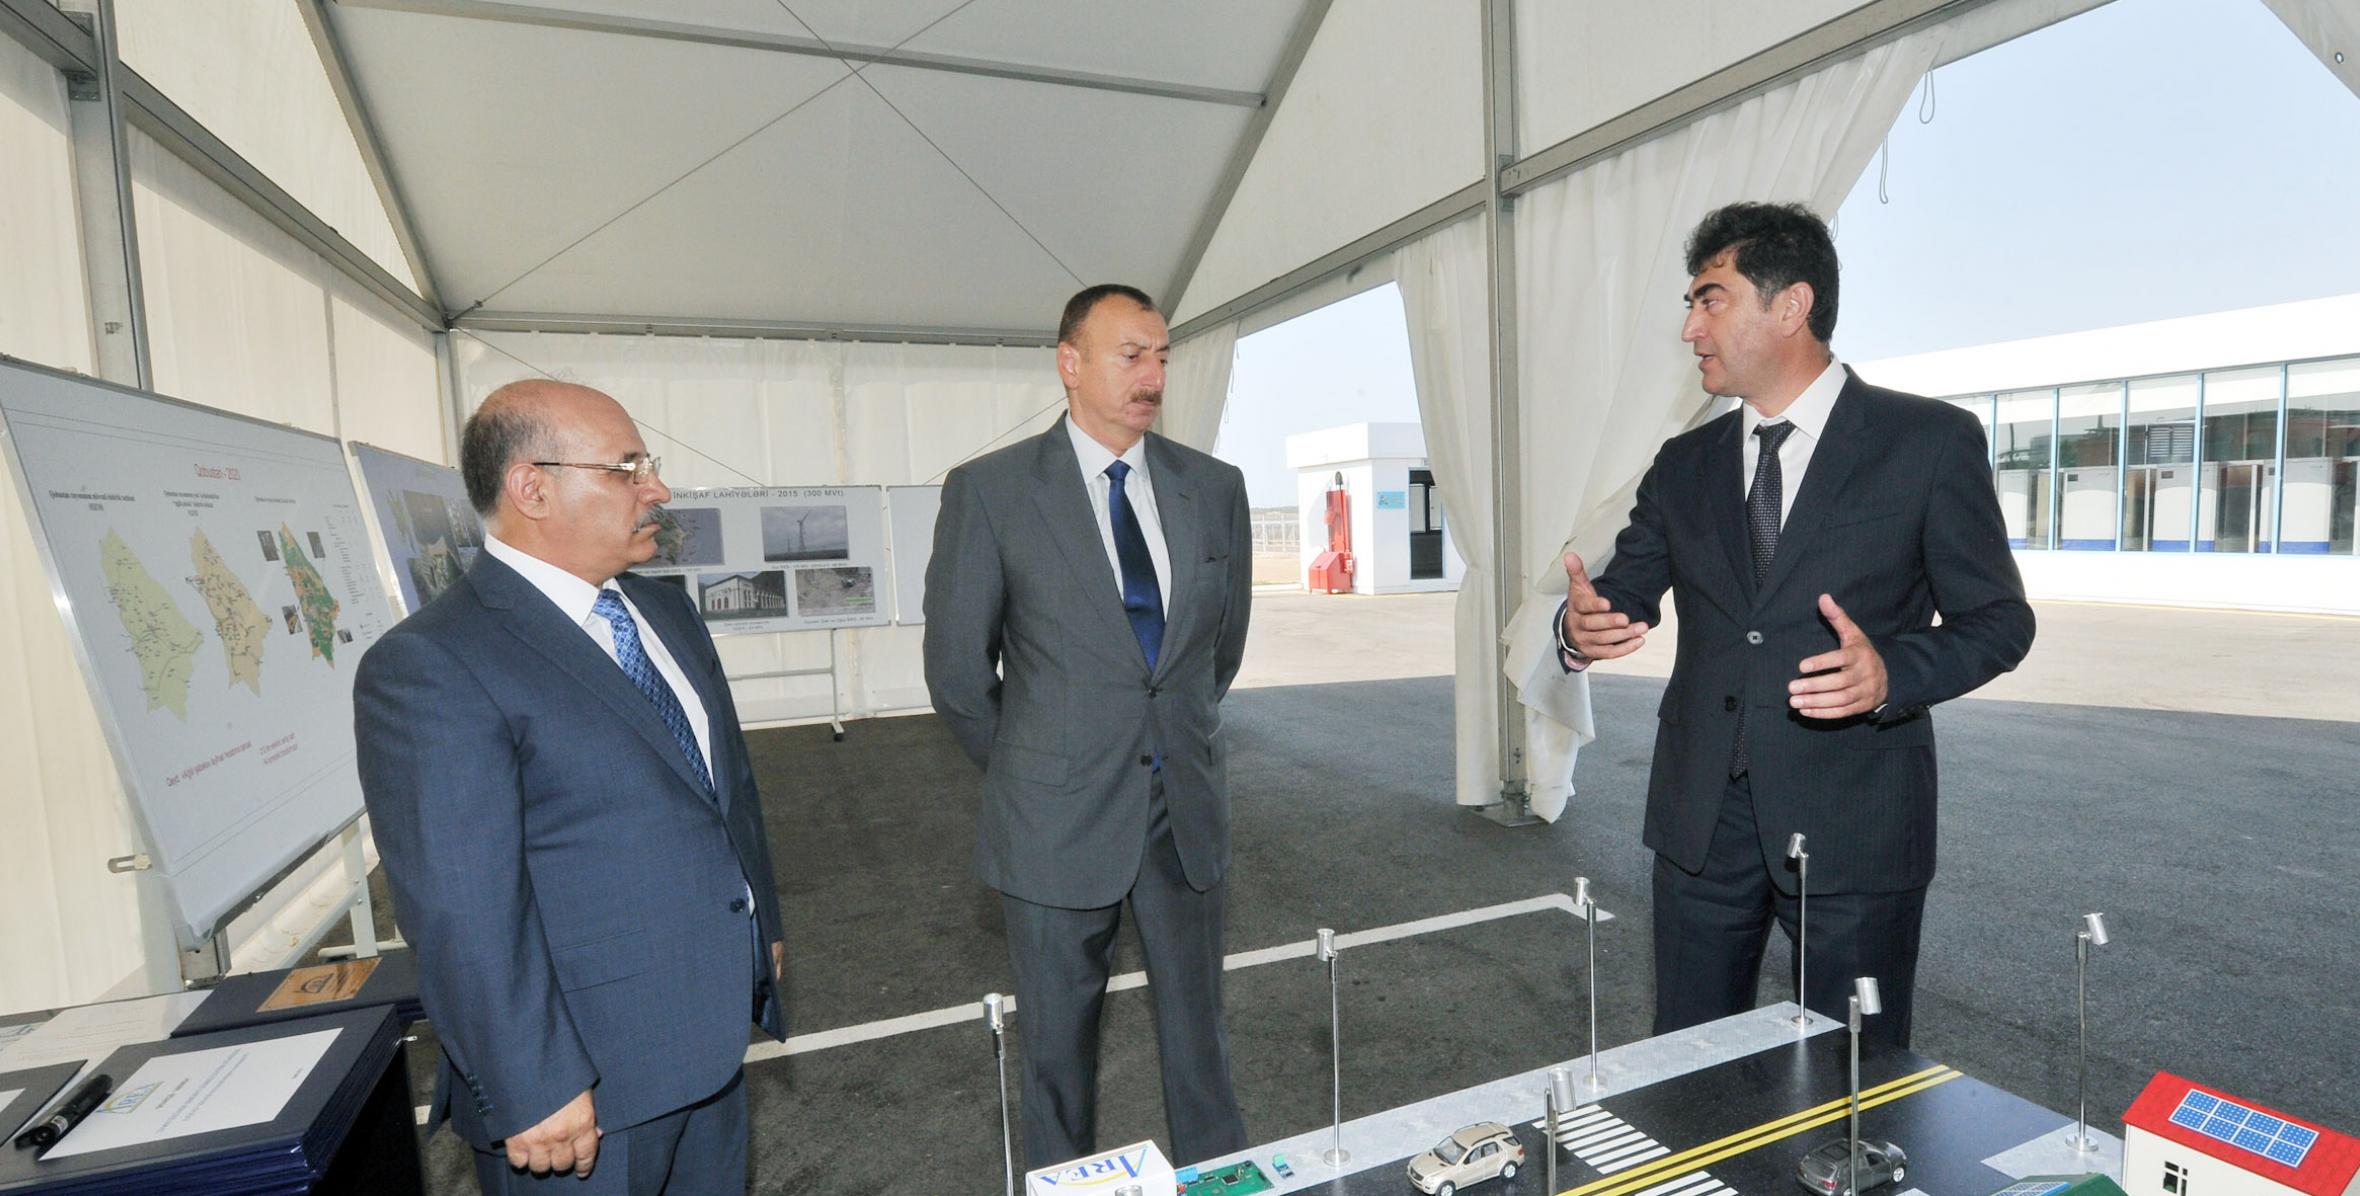 Ilham Aliyev attended the opening of the Surakhani solar power station